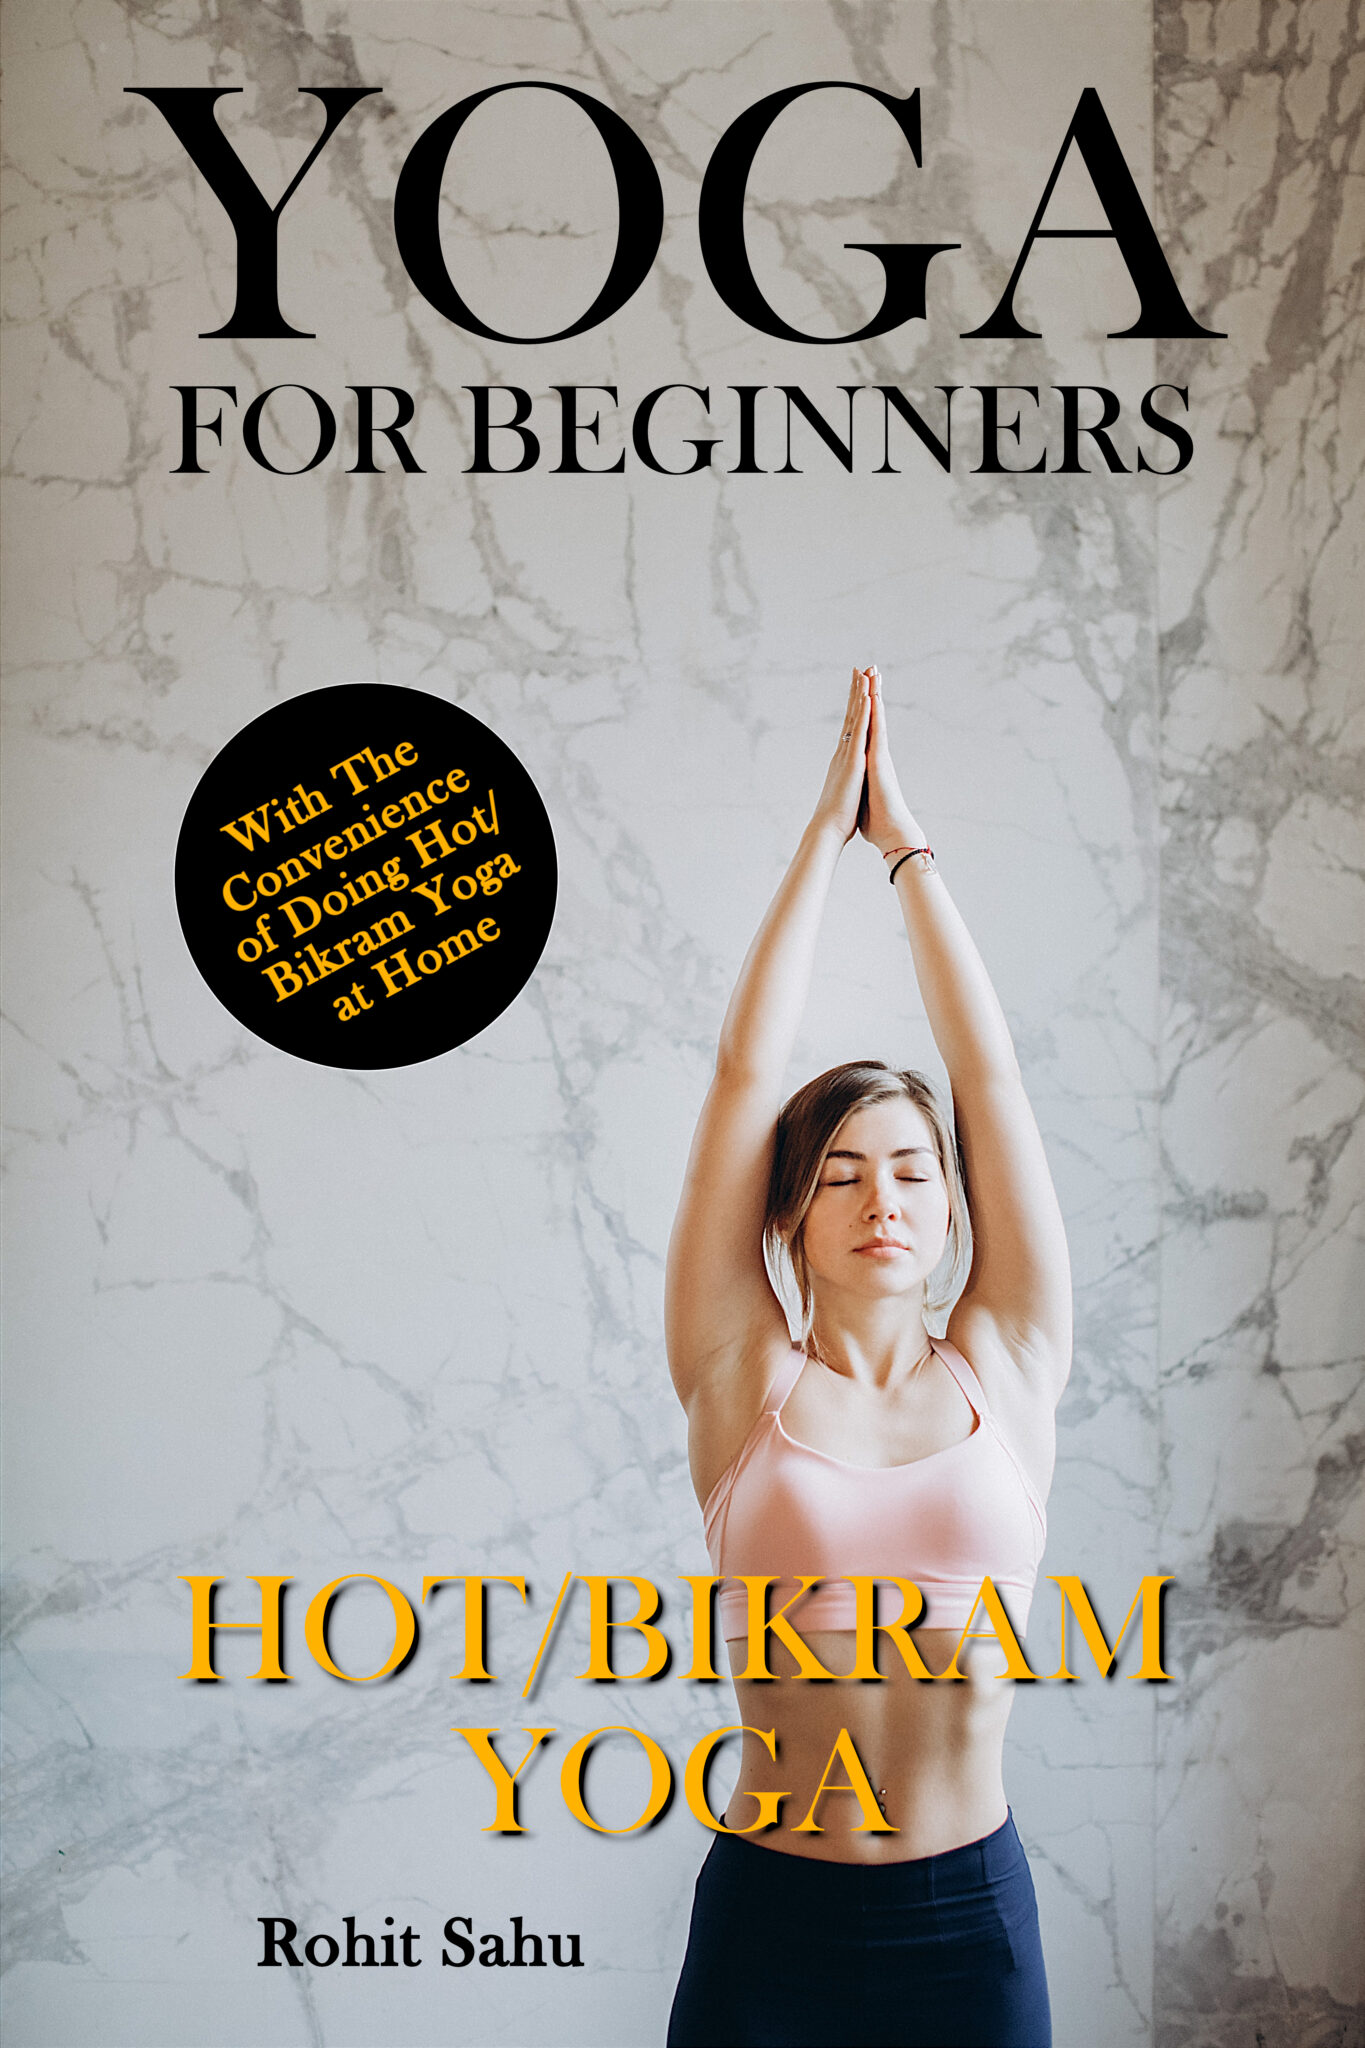 Yoga For Beginners: Hot/Bikram Yoga: The Complete Guide to Master Hot/Bikram Yoga; Benefits, Essentials, Poses (with Pictures), Precautions, Common Mistakes, FAQs, and Common Myths